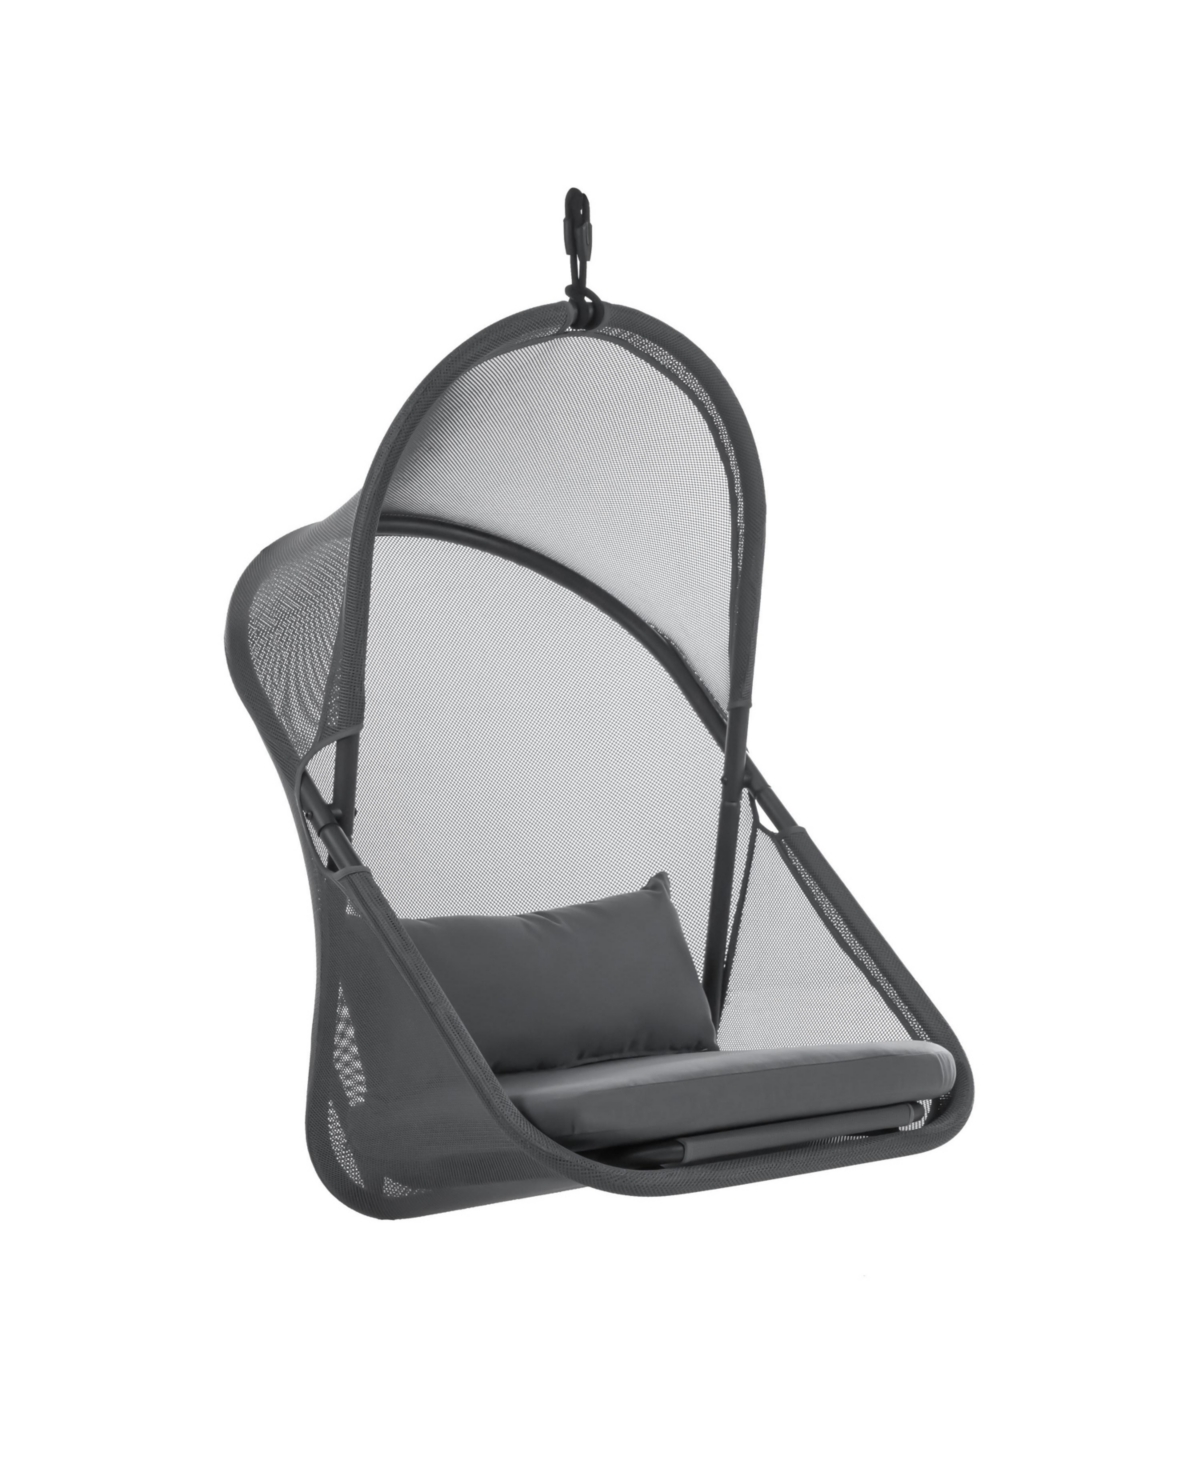 Furniture Of America 43.25" Mesh Foldable Swing Chair With Canopy Low Back Cushion No Stand In Dark Gray